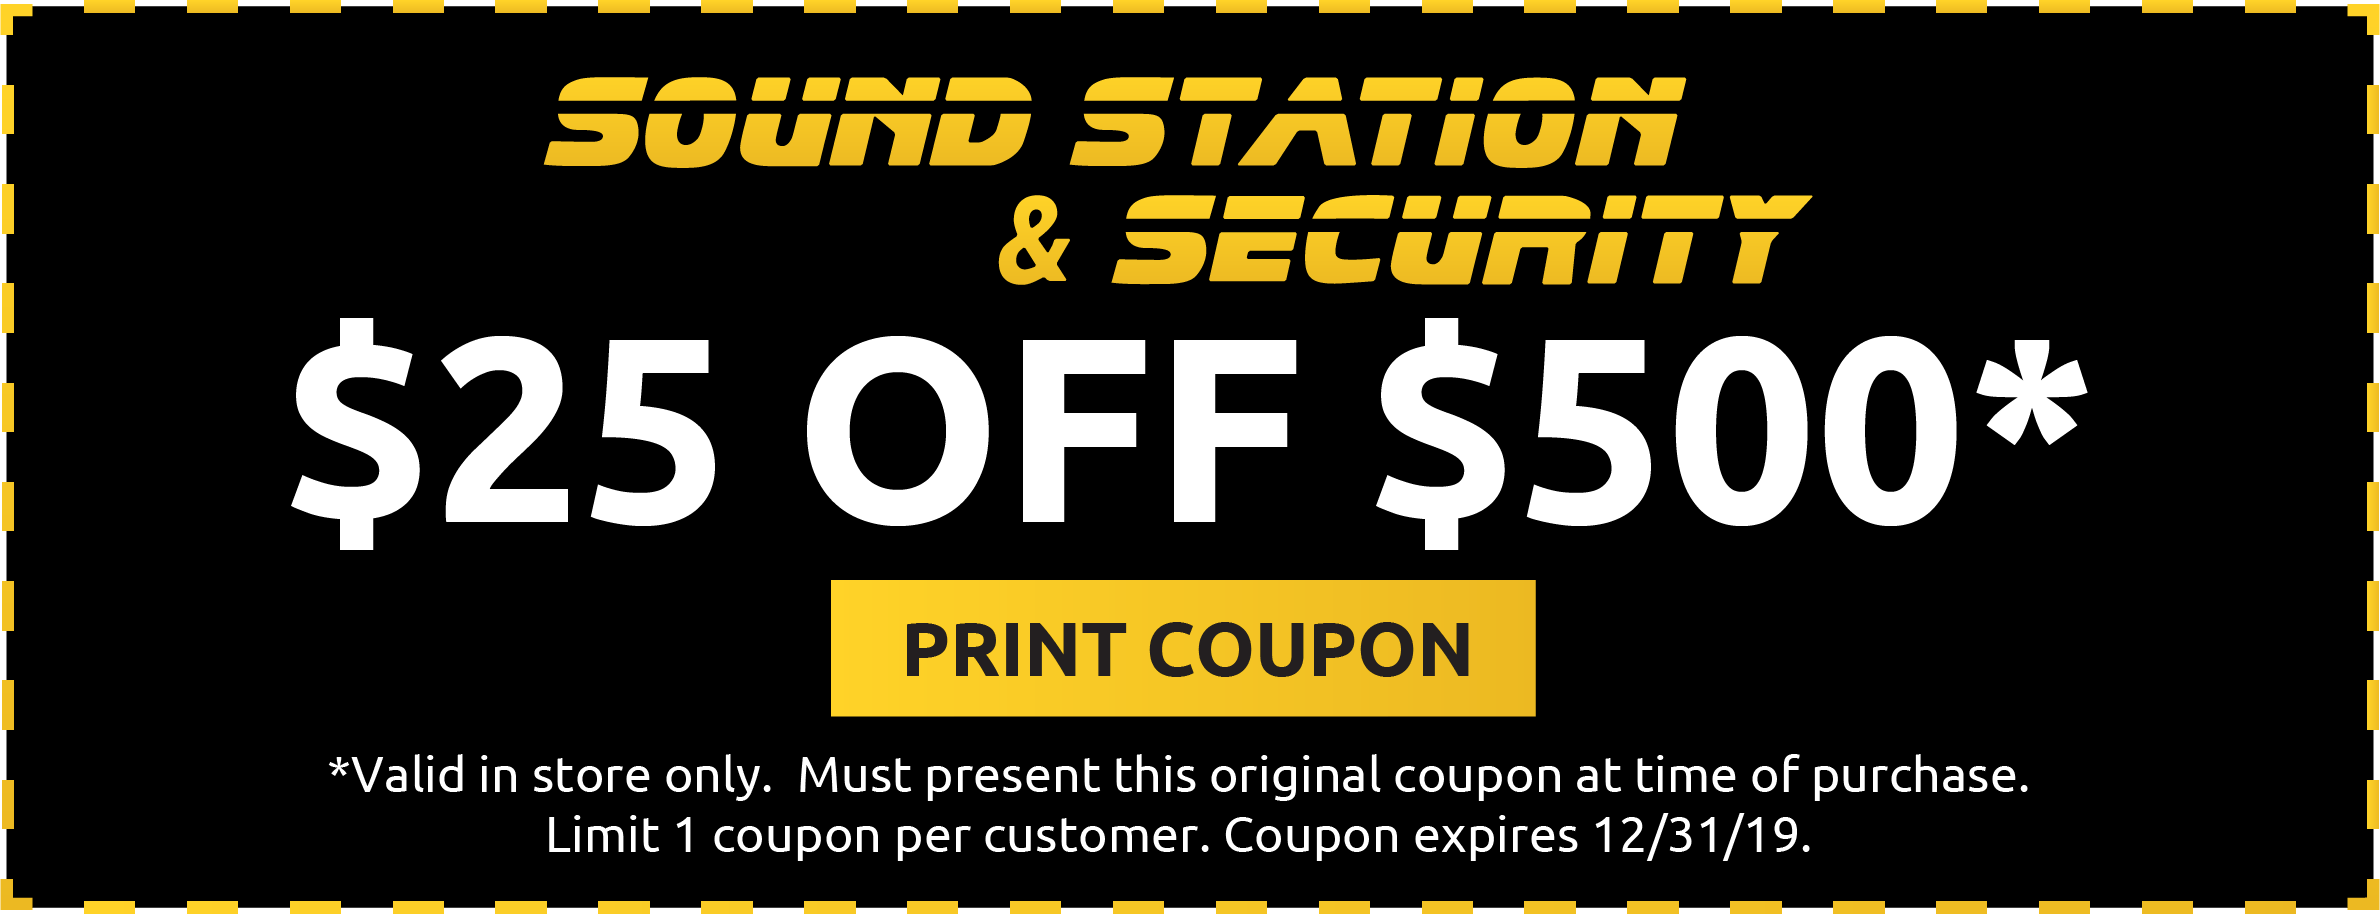 Sound Station & Security Coupon